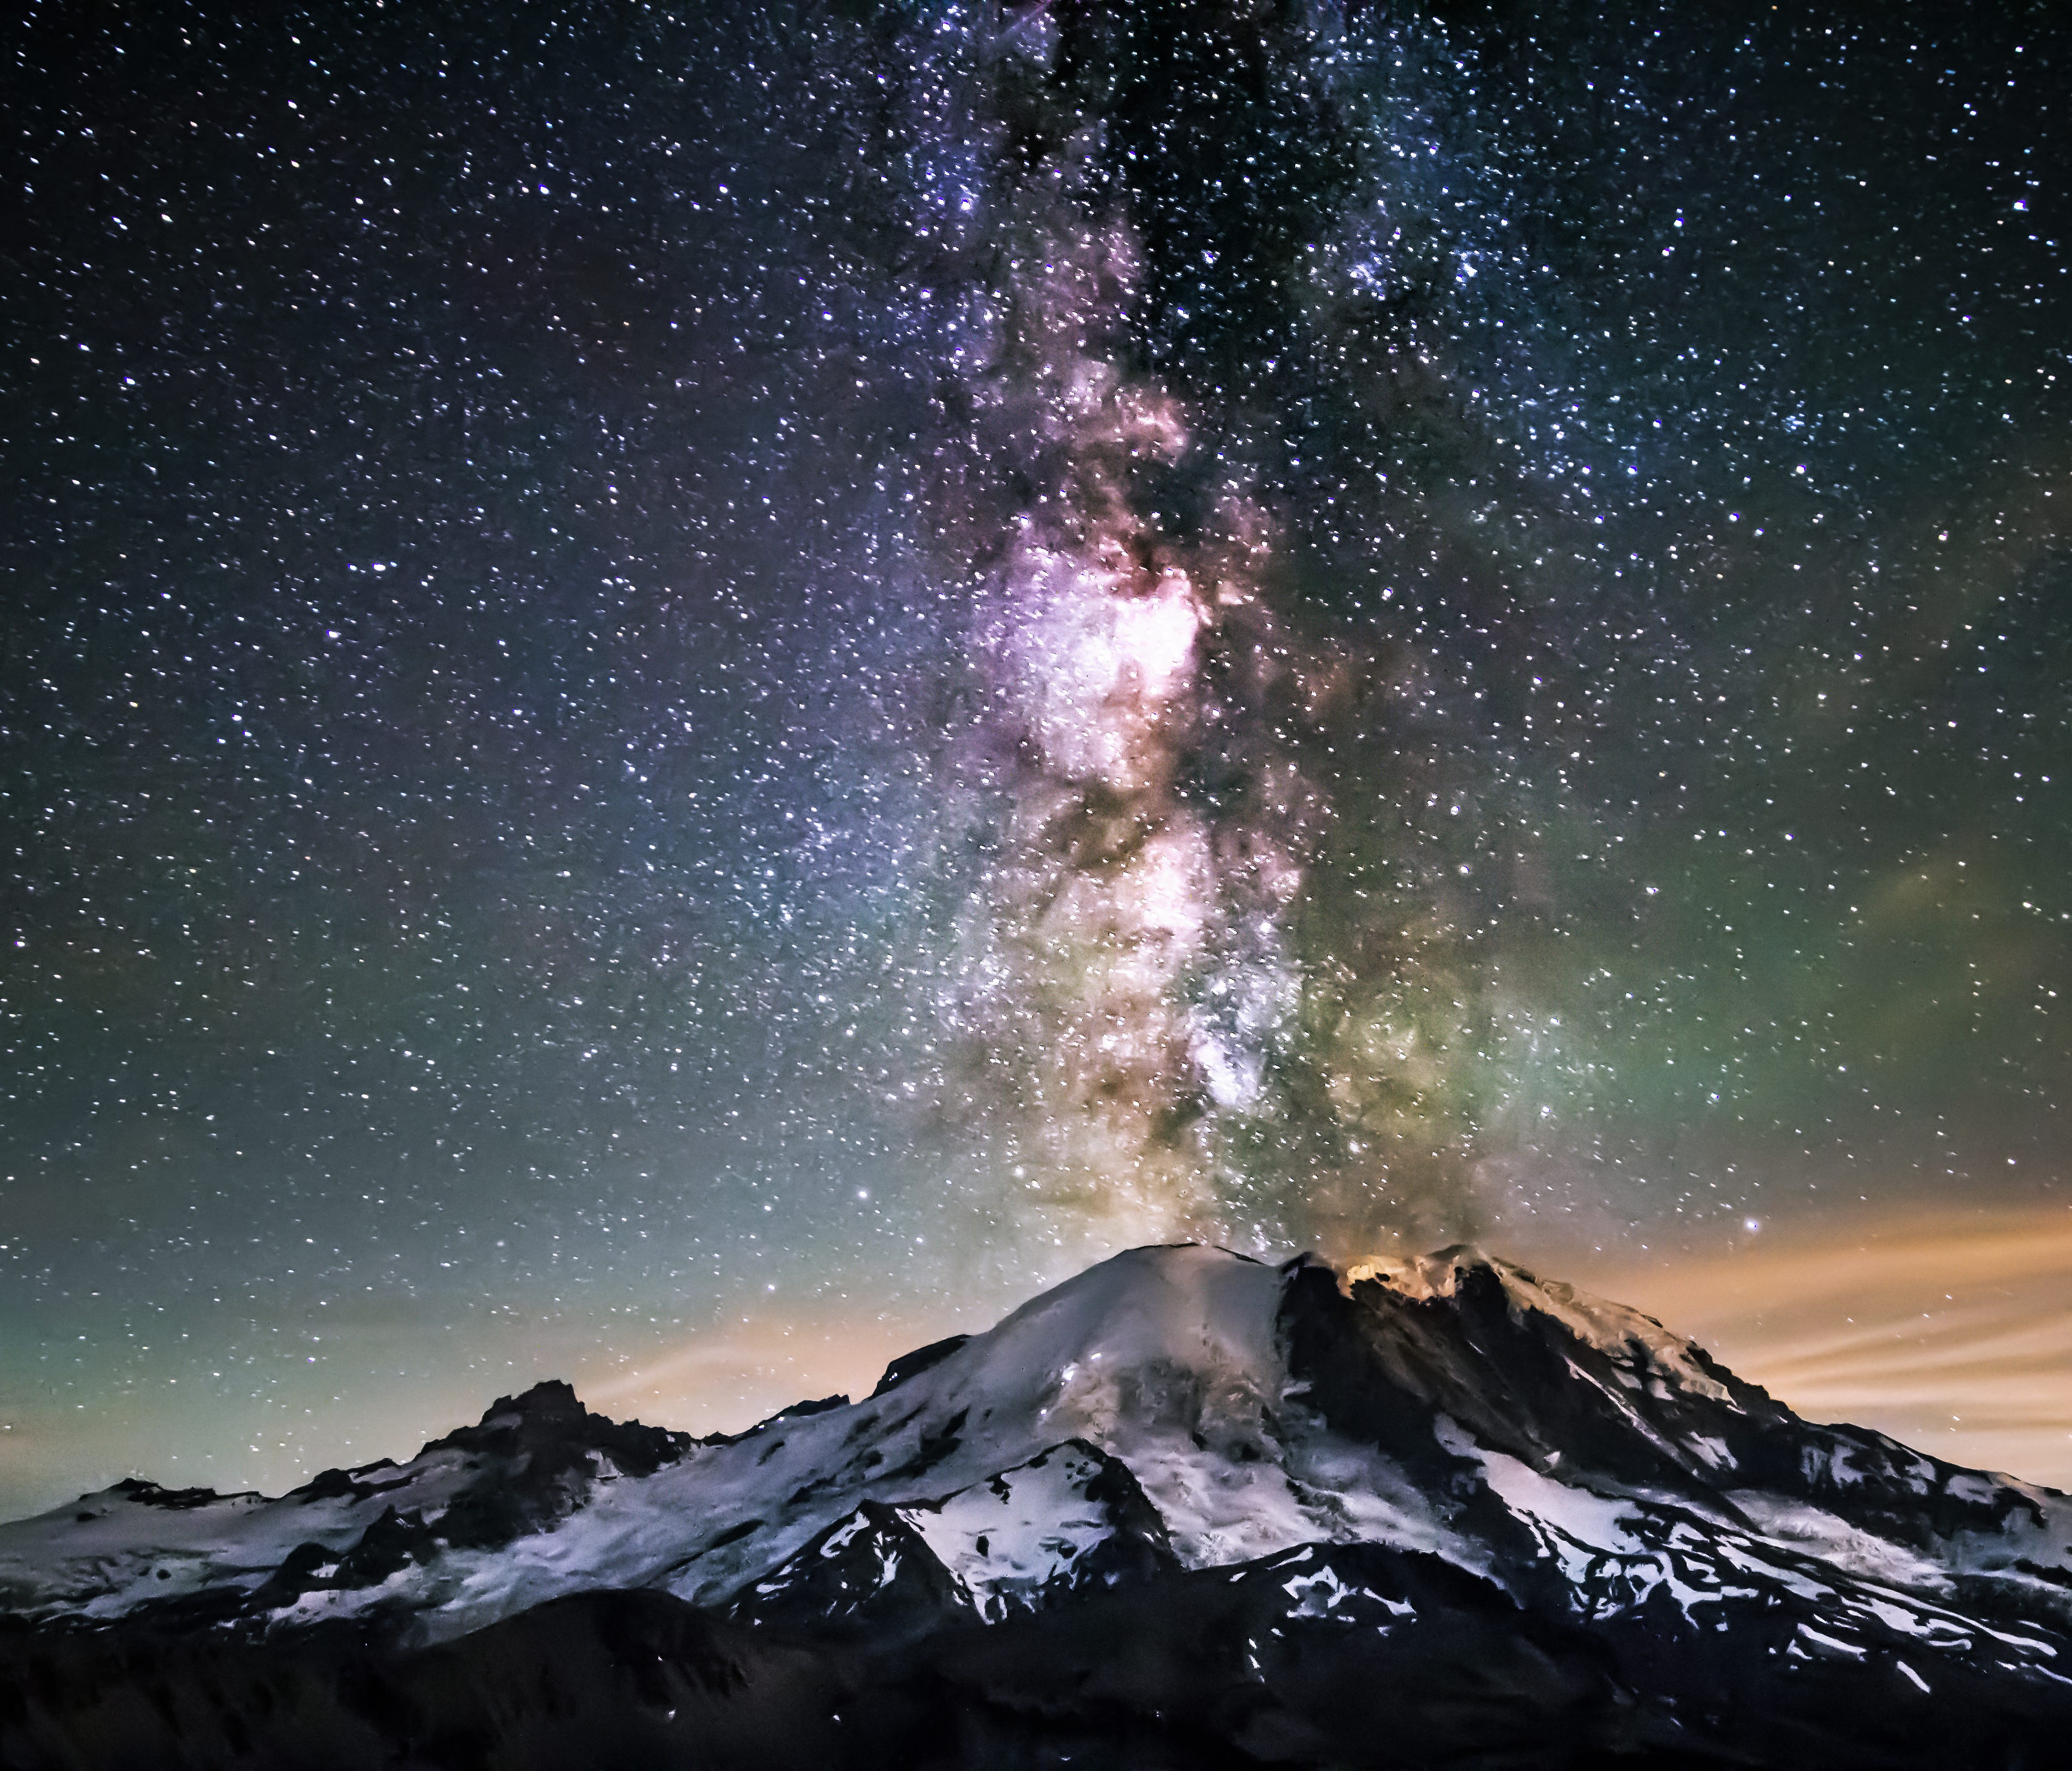 Mount Rainier National Park's majestic peak towers over 14,000 feet tall and contains 25 named glaciers. During the summer months this Washington park turns into a rainbow of colors, filled with valleys overflowing with colorful wildflowers. Pictured